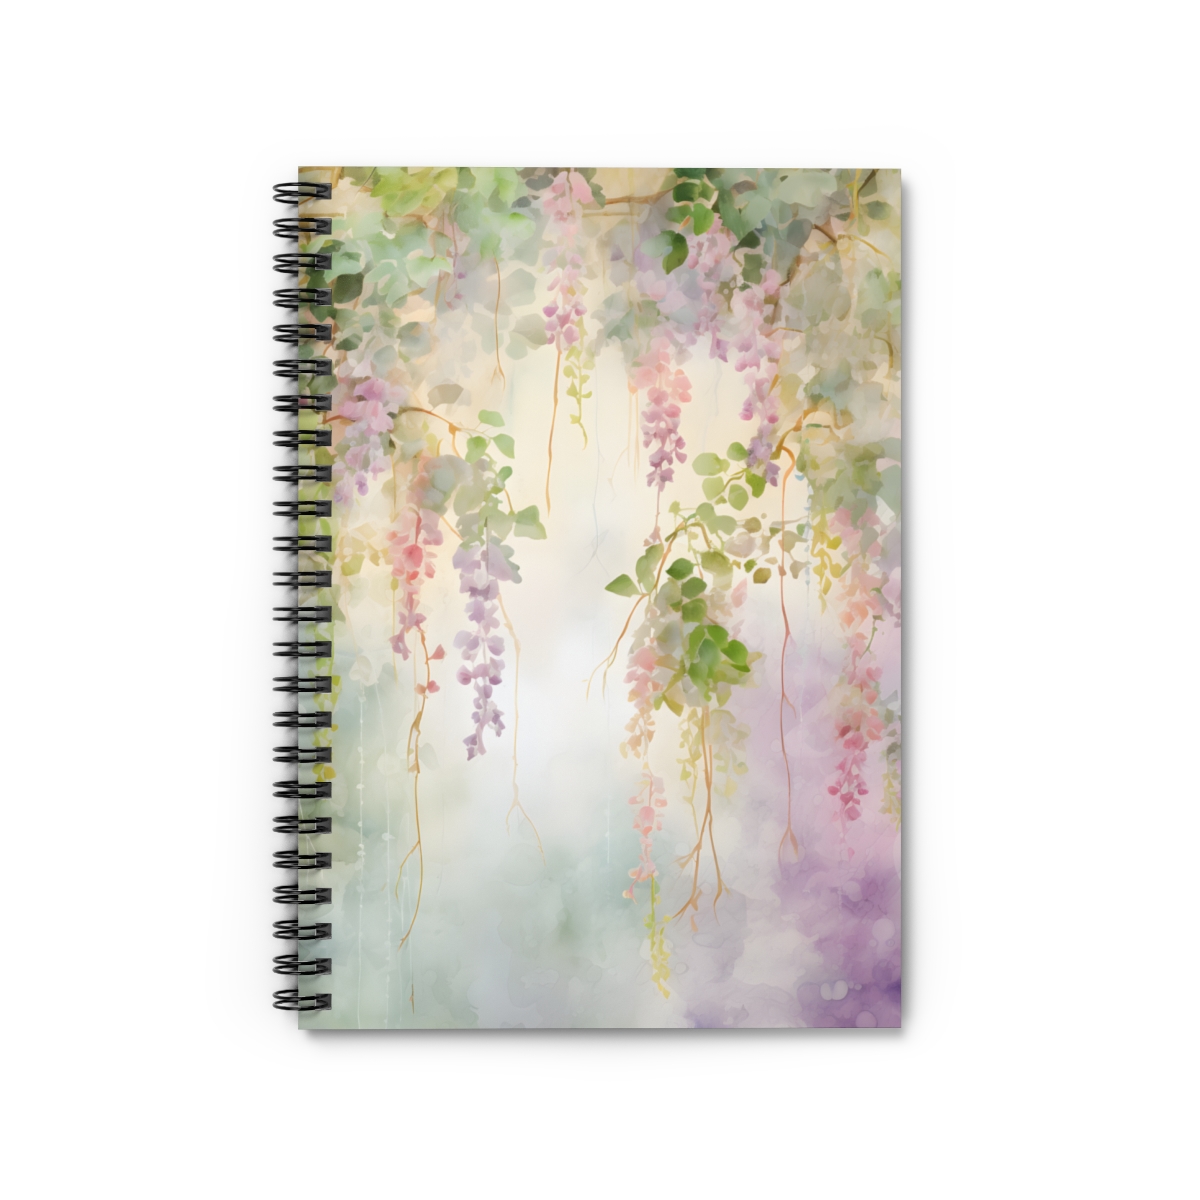 floral vine spiral notebook with greens and purple colors